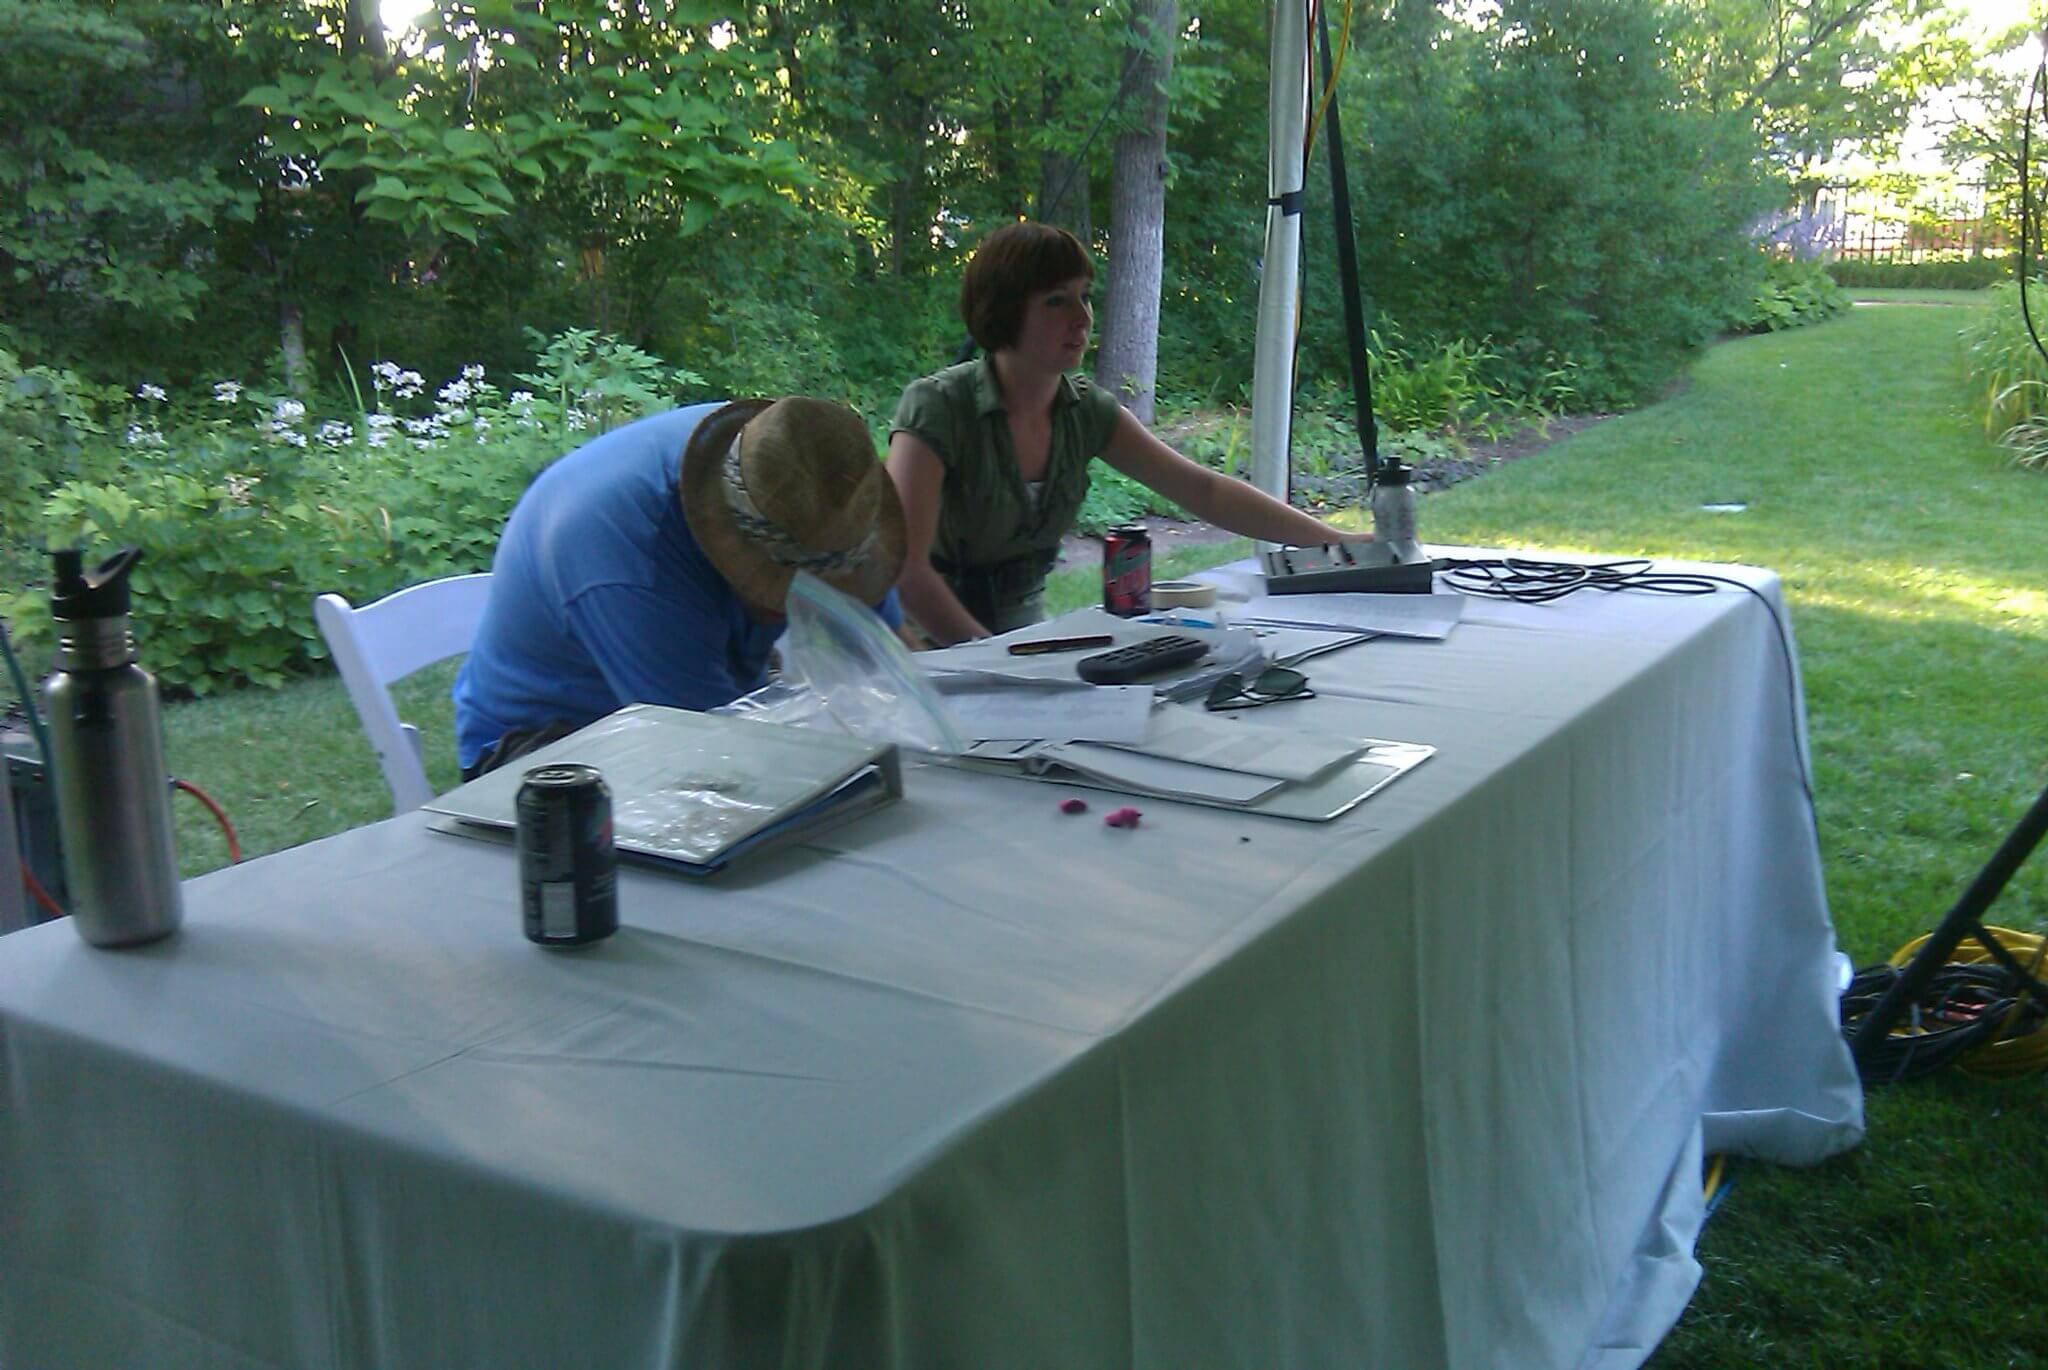 Kendra seen her stage managing the production at Faeries, Sprites, and Lights at Minnestrista in Muncie, IN.